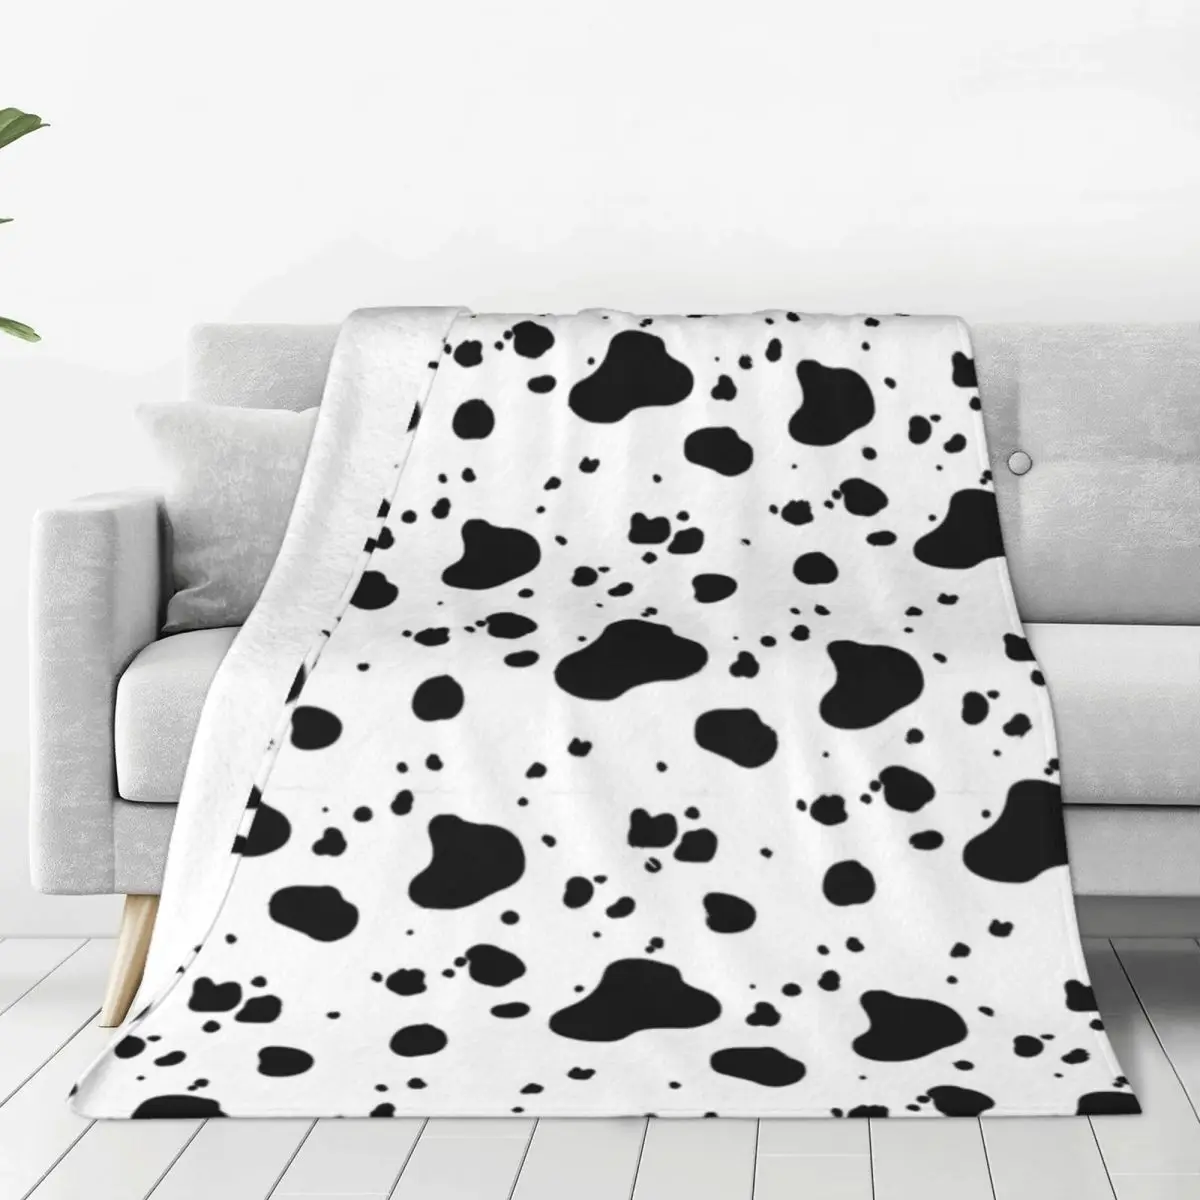 

Dalmatian Spots Art Flannel Throw Blanket Dog Animal Lover Blankets for Home Office Ultra-Soft Bed Rug